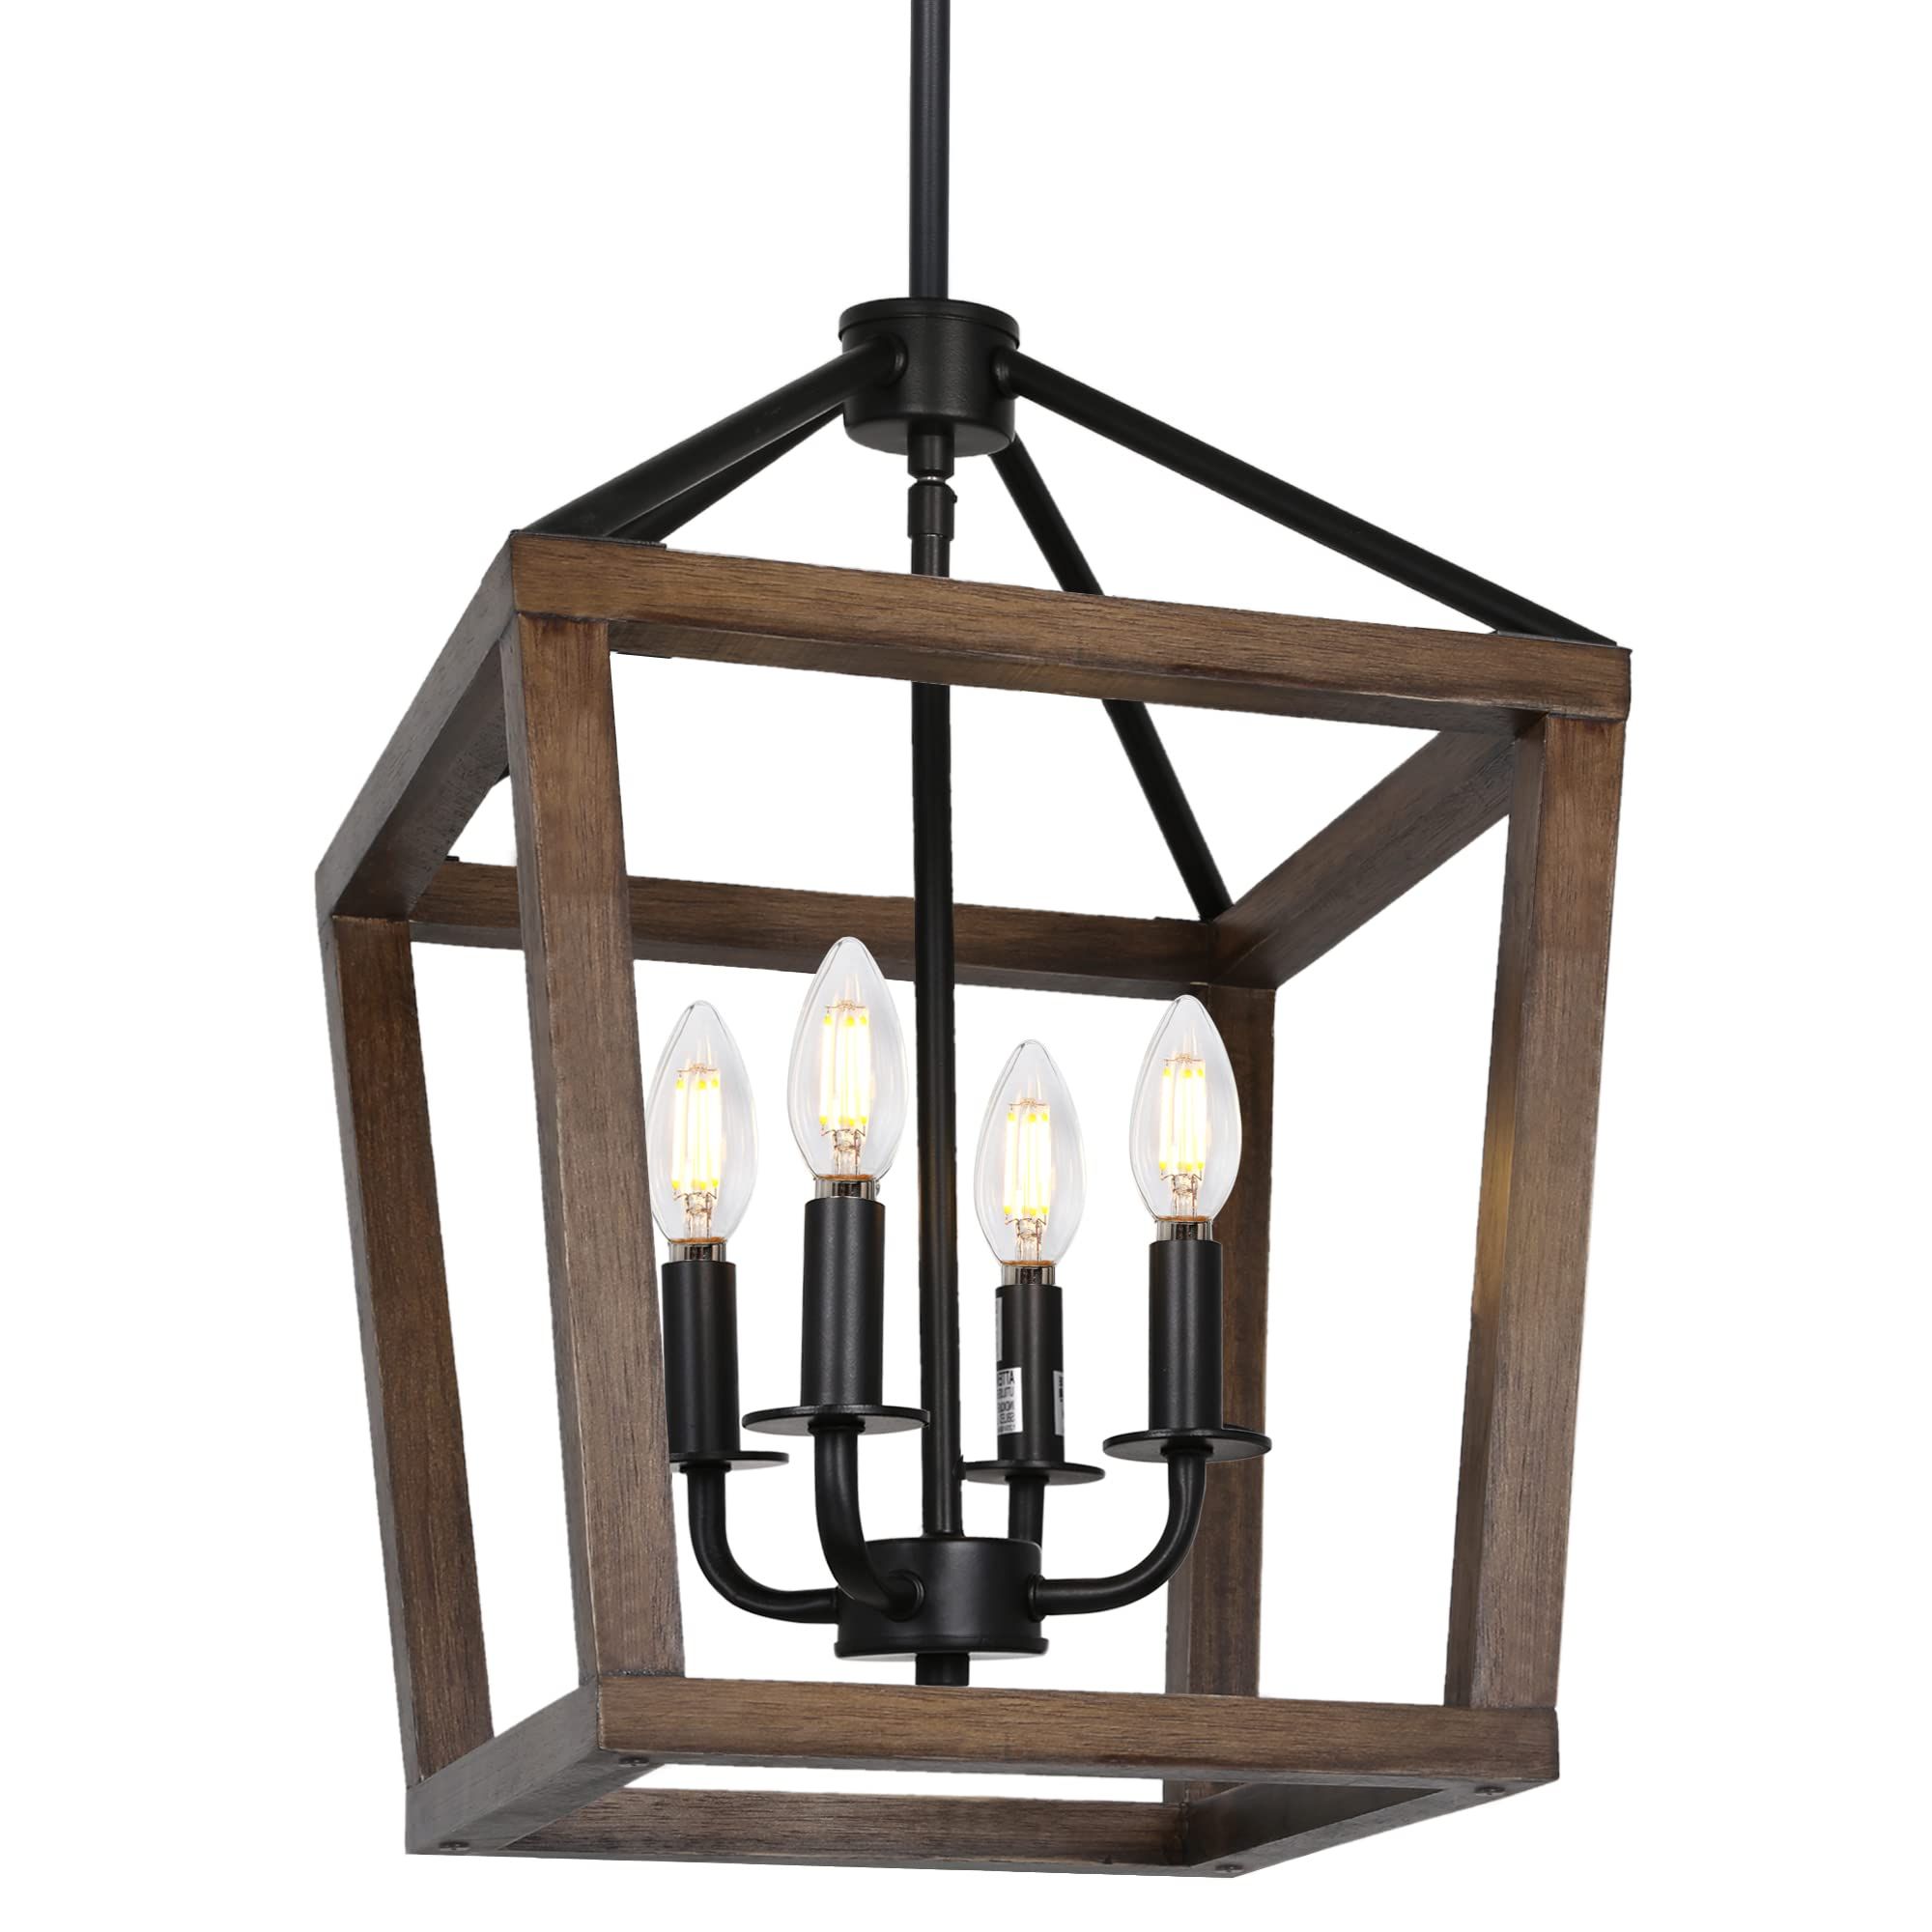 4 Light Rustic Chandelier, Classic Lantern Pendant Light With Oak Wood And  Iron Finish, Farmhouse Lighting Fixtures For Dining Room, Kitchen, Hallway  – – Amazon Regarding Most Recent Brown Wood Lantern Chandeliers (View 1 of 15)